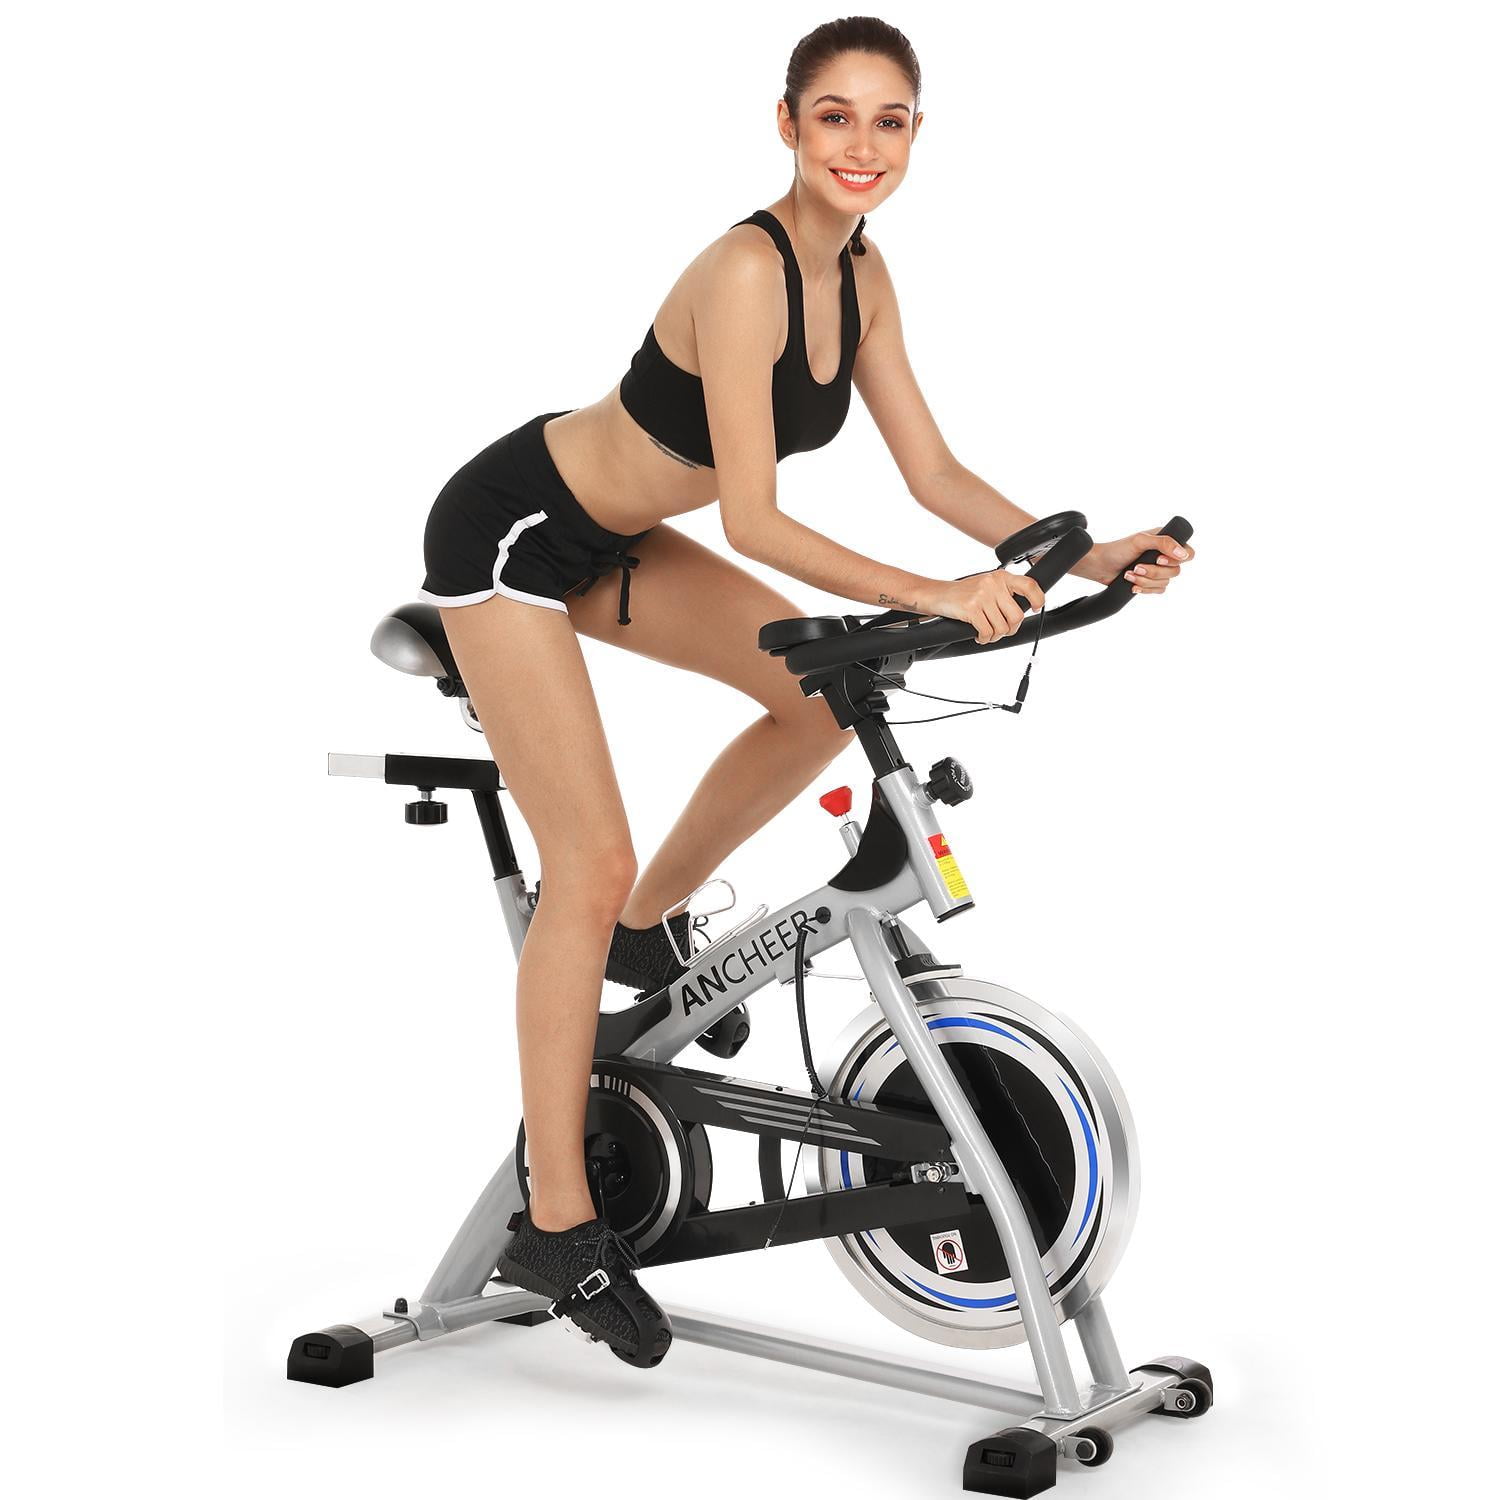 ANCHEER Indoor Cycling Bike Stationary Excerise Bike Quiet Smooth Belt Drive System Flywheel Exercise Bike with Heart Rate and LCD Monitor Adjustable Seat and Handlebars & Base for Home Workout 